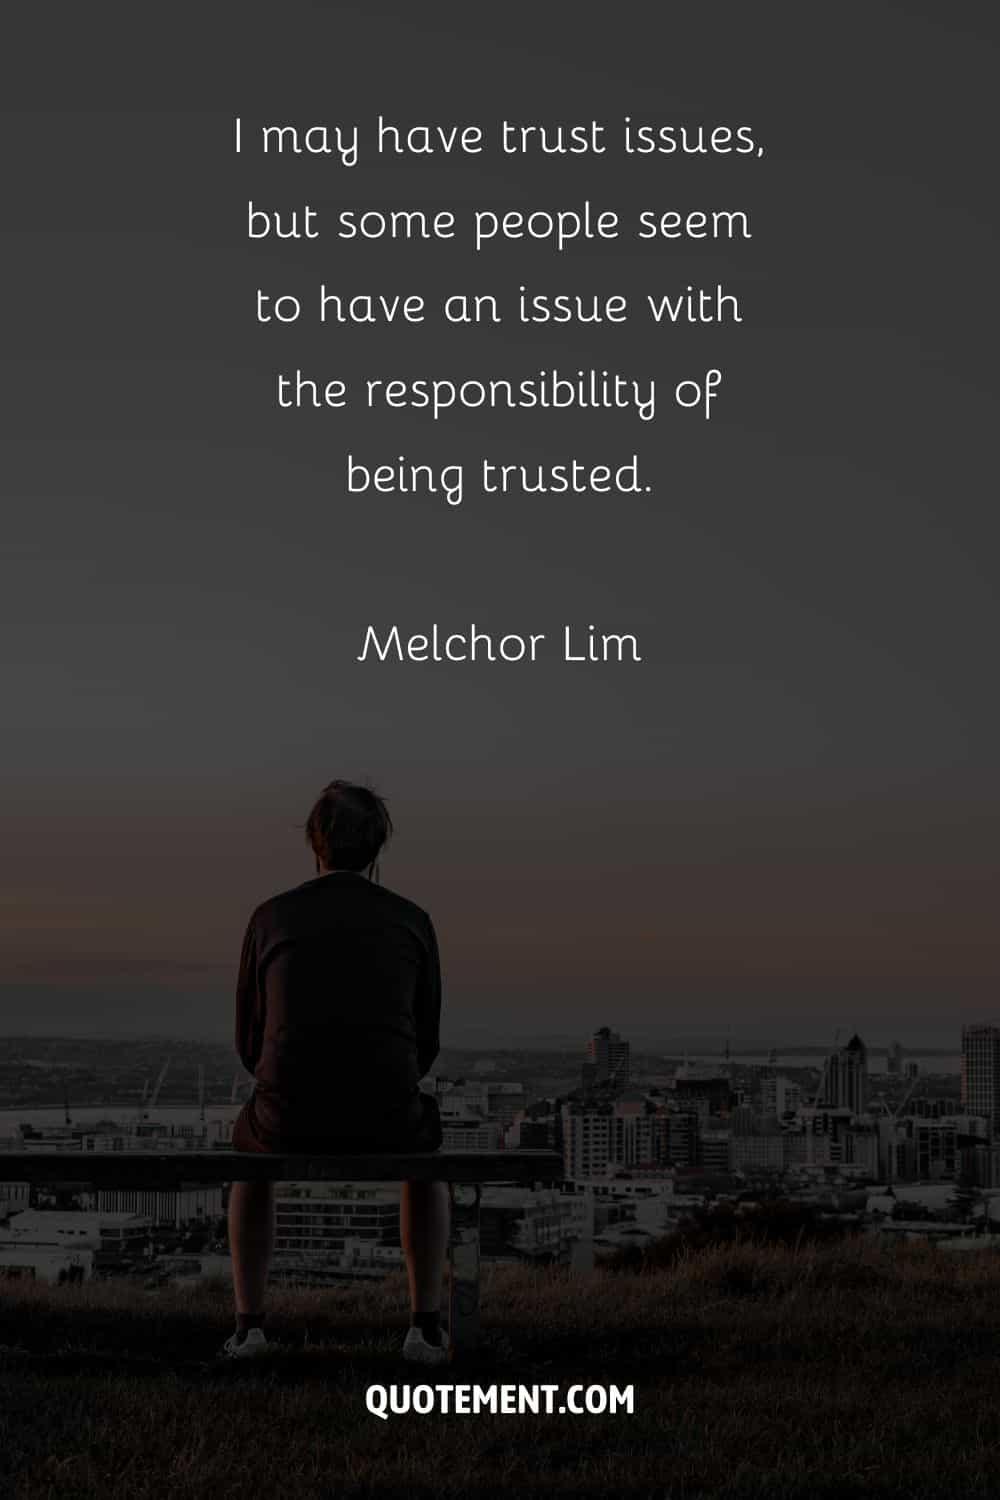 “I may have trust issues, but some people seem to have an issue with the responsibility of being trusted.” ― Melchor Lim